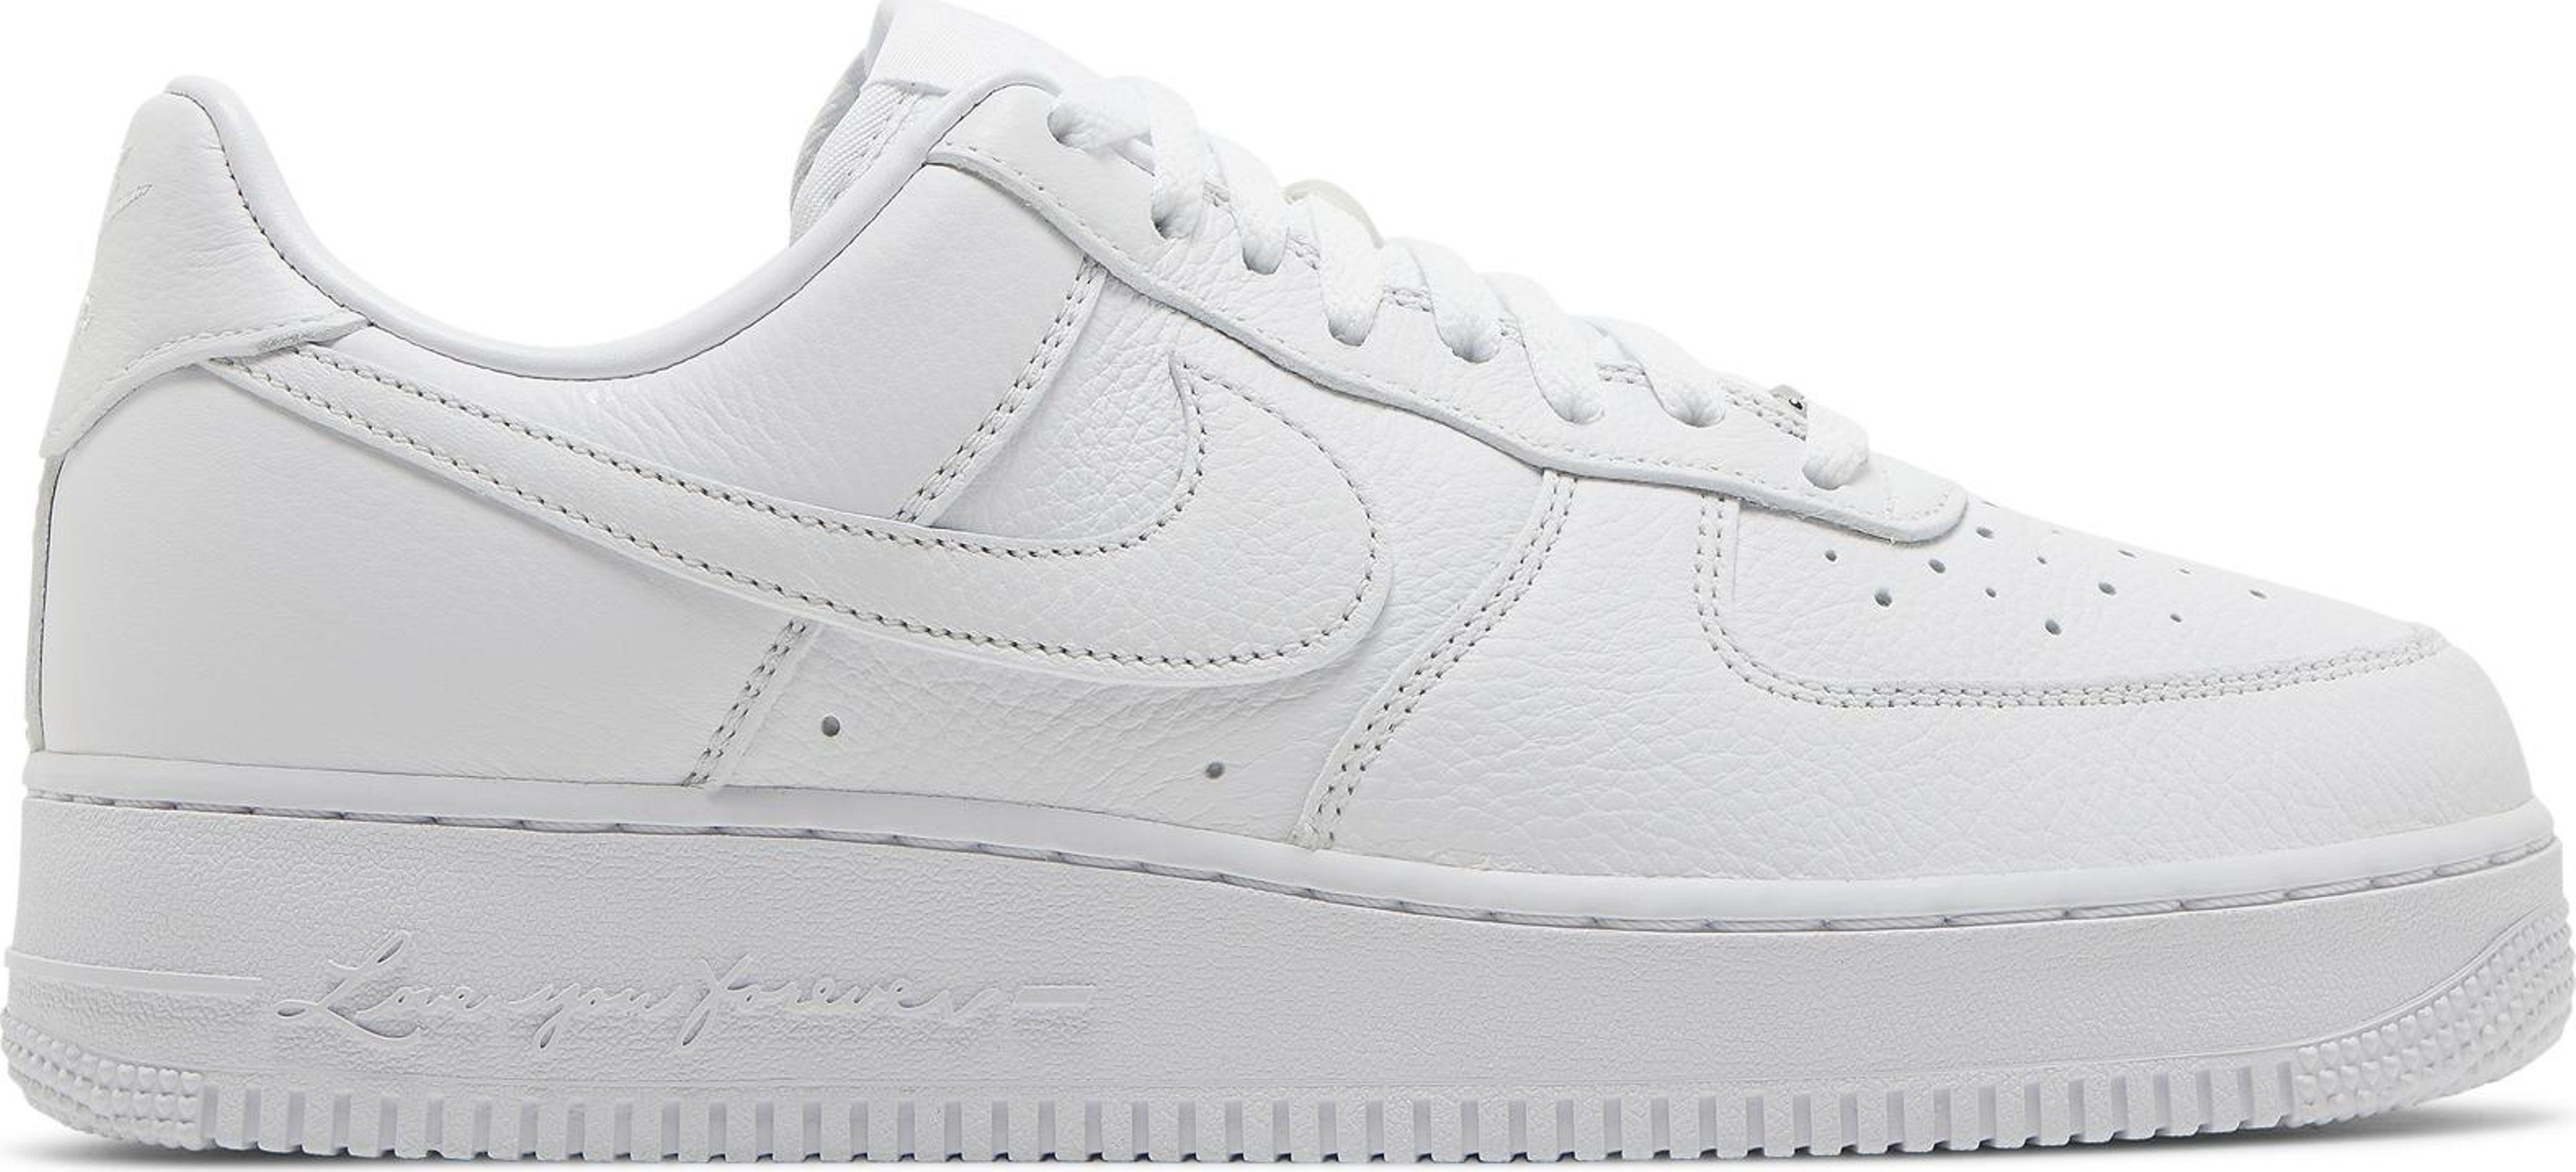 NOCTA x Air Force 1 Low 'Certified Lover Boy' | GOAT